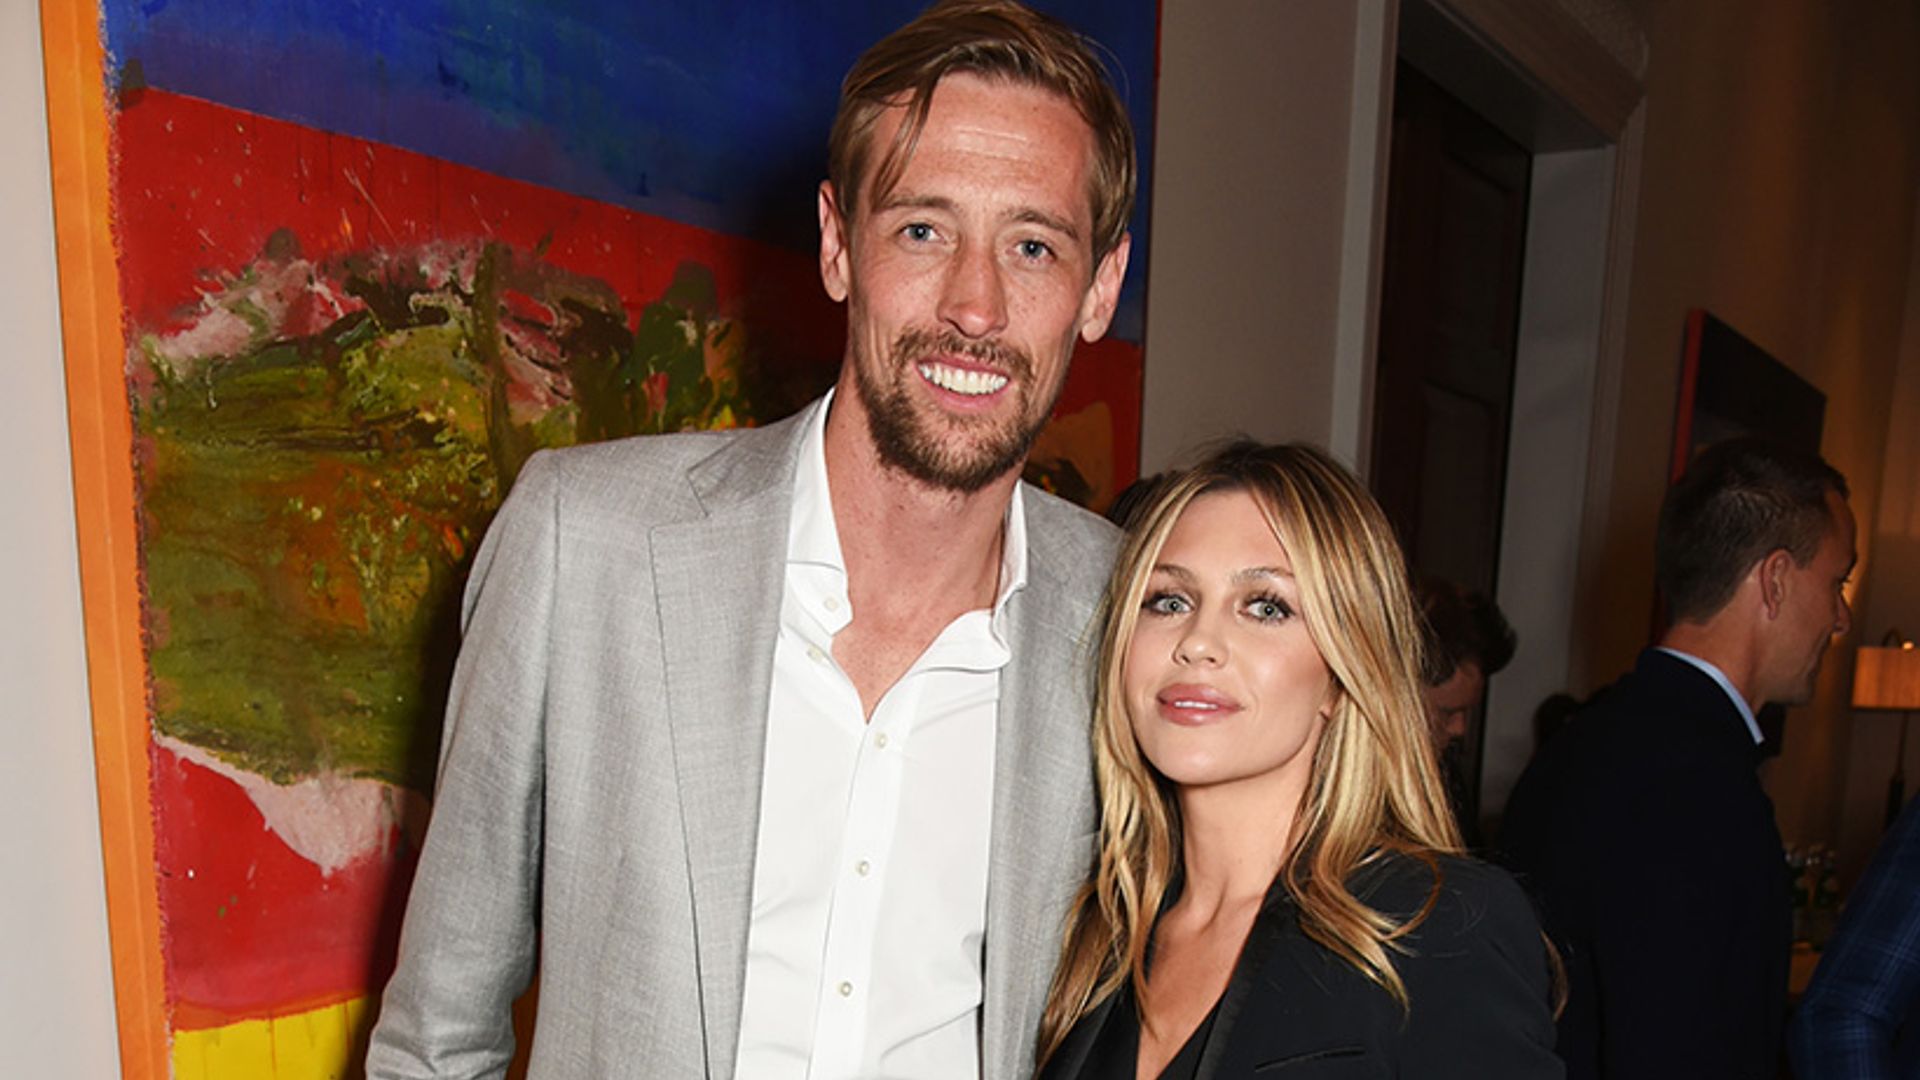 Abbey Clancy welcomes third child! Find out the newborn's name